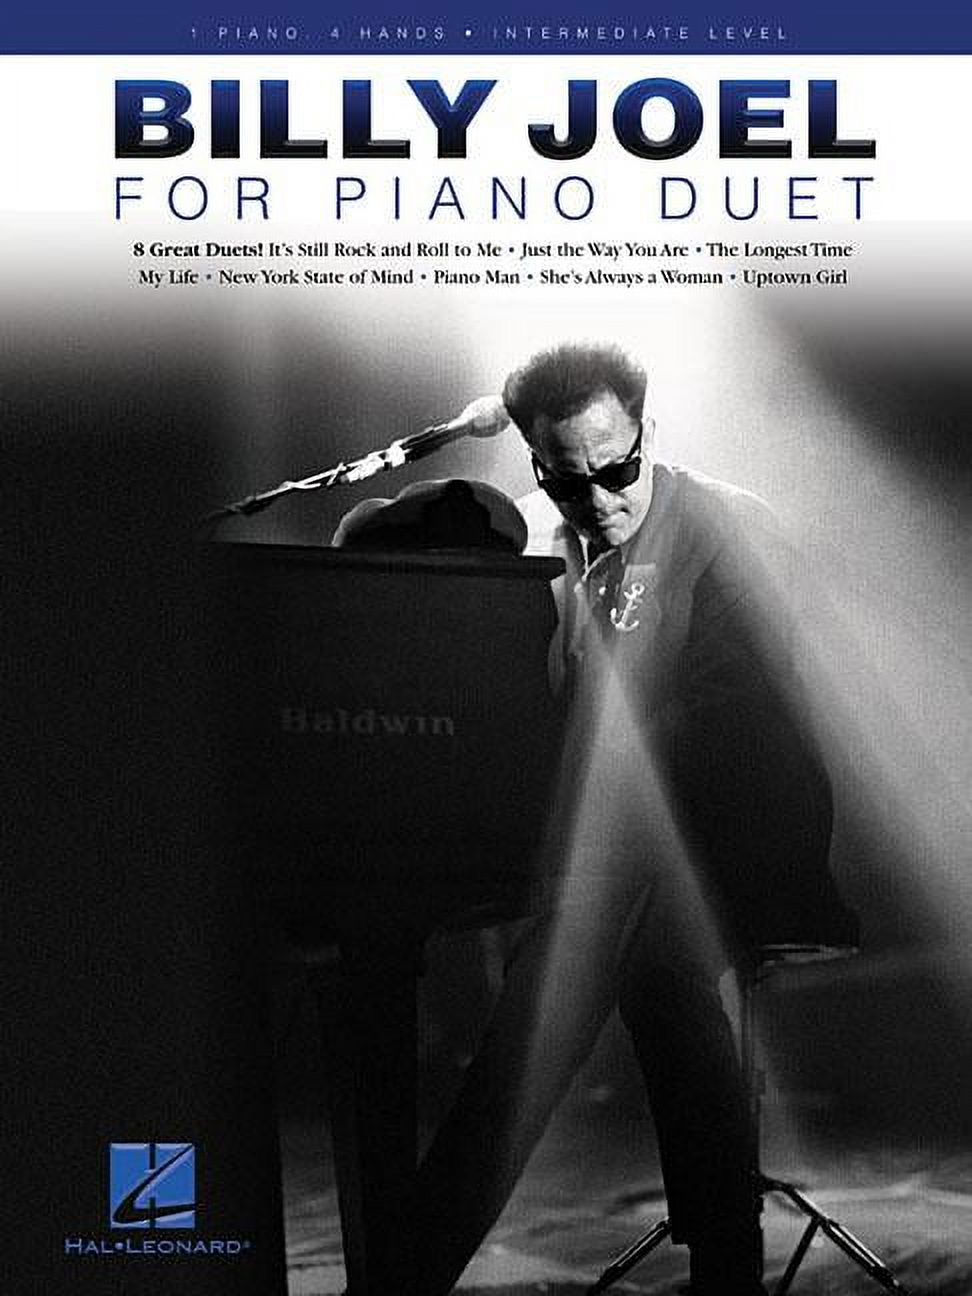 Billy Joel for Piano Duet: 1 Piano, 4 Hands / Intermediate Level (Paperback) - image 1 of 1